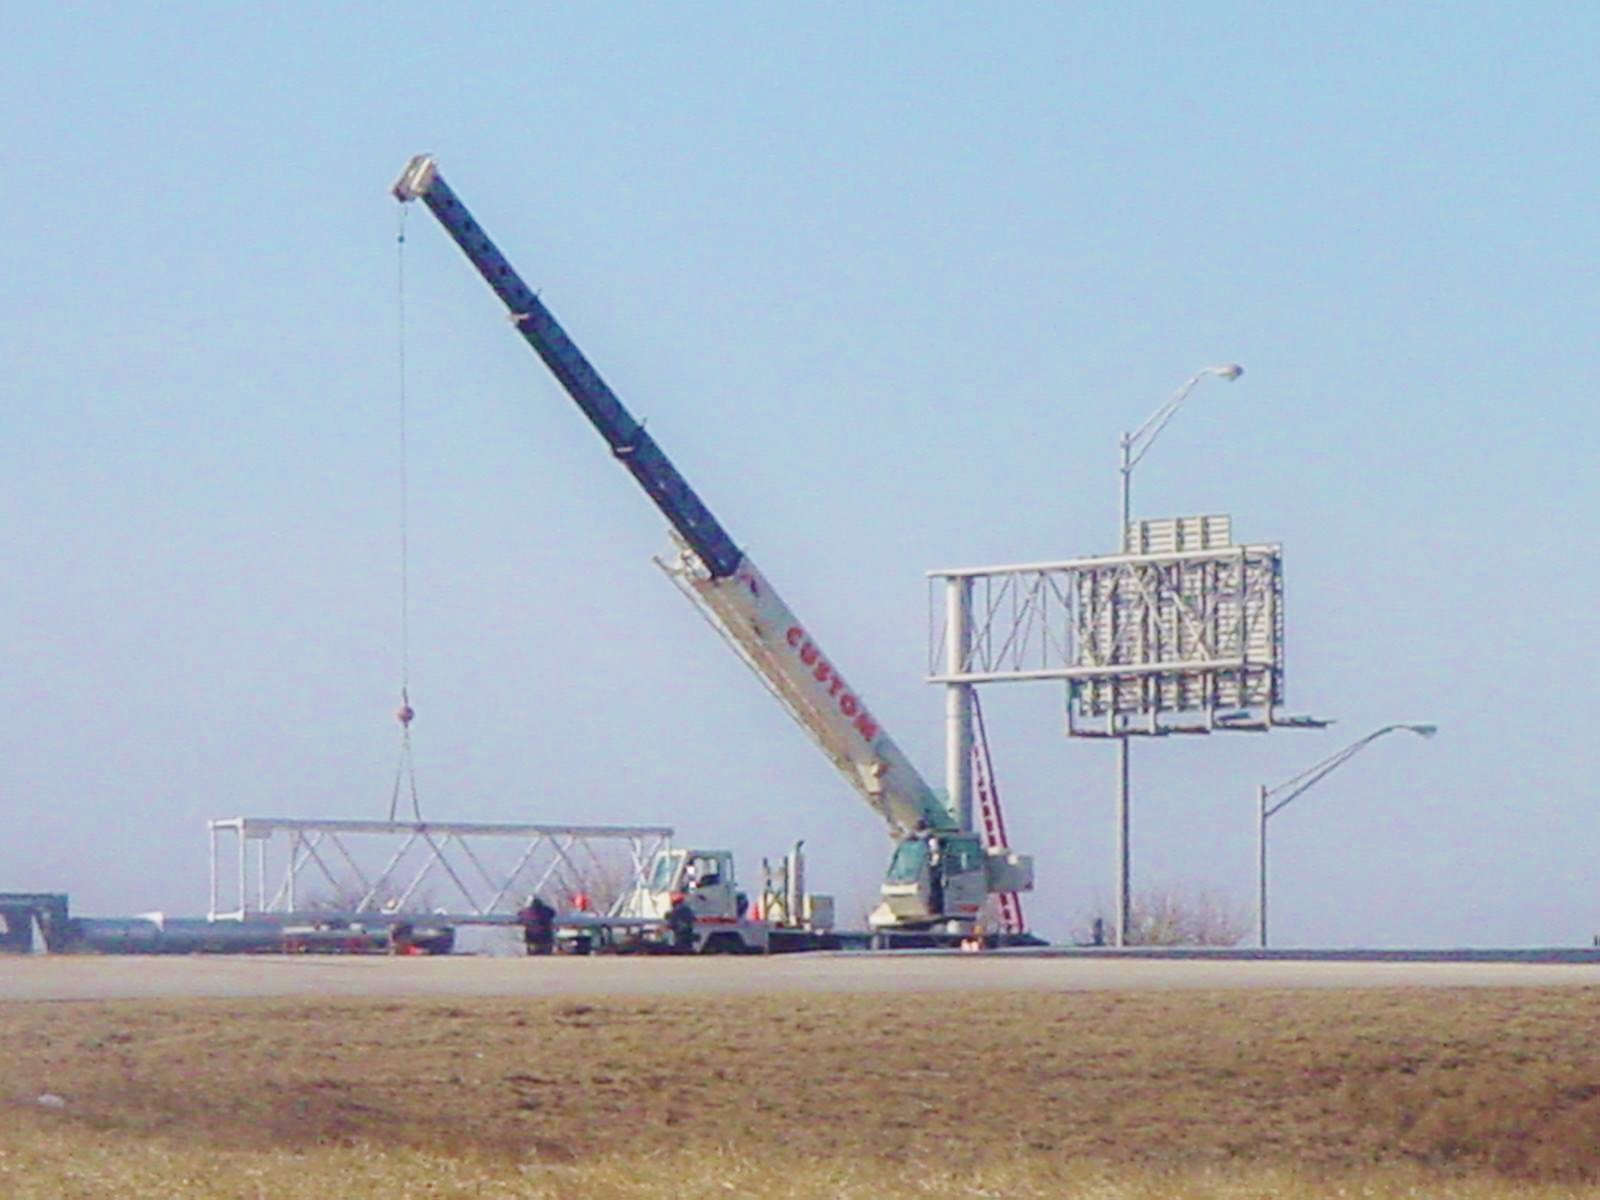 30 ton crane is assisting with a new highway sign.